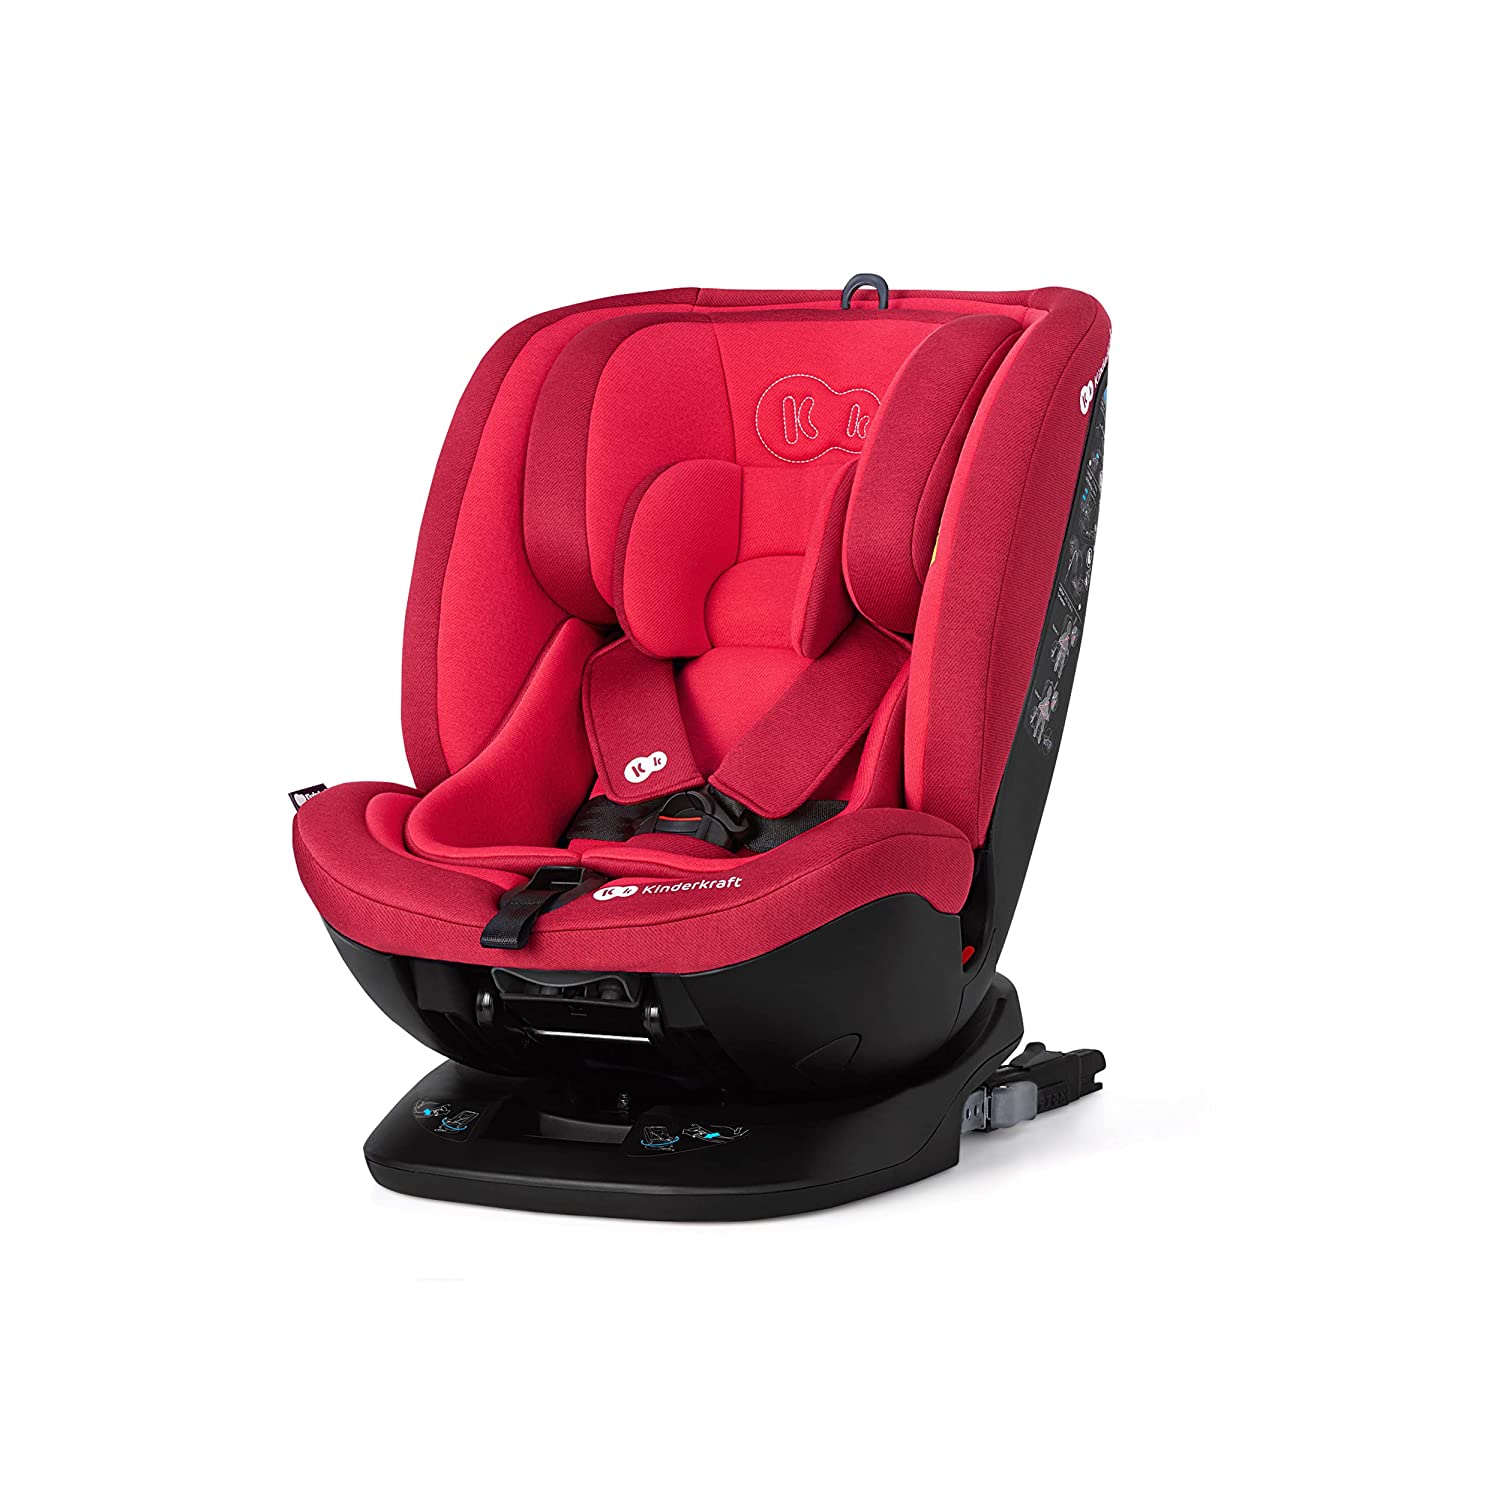 kk Kinderkraft Kinderkraft XPEdition Child Car Seat with 360 Degree Rotation, Isofix, Top Tether, Base Station, Special Safety Systems, FWF and RWF, from Birth Group 0/1/2/3 0-36 kg, Red